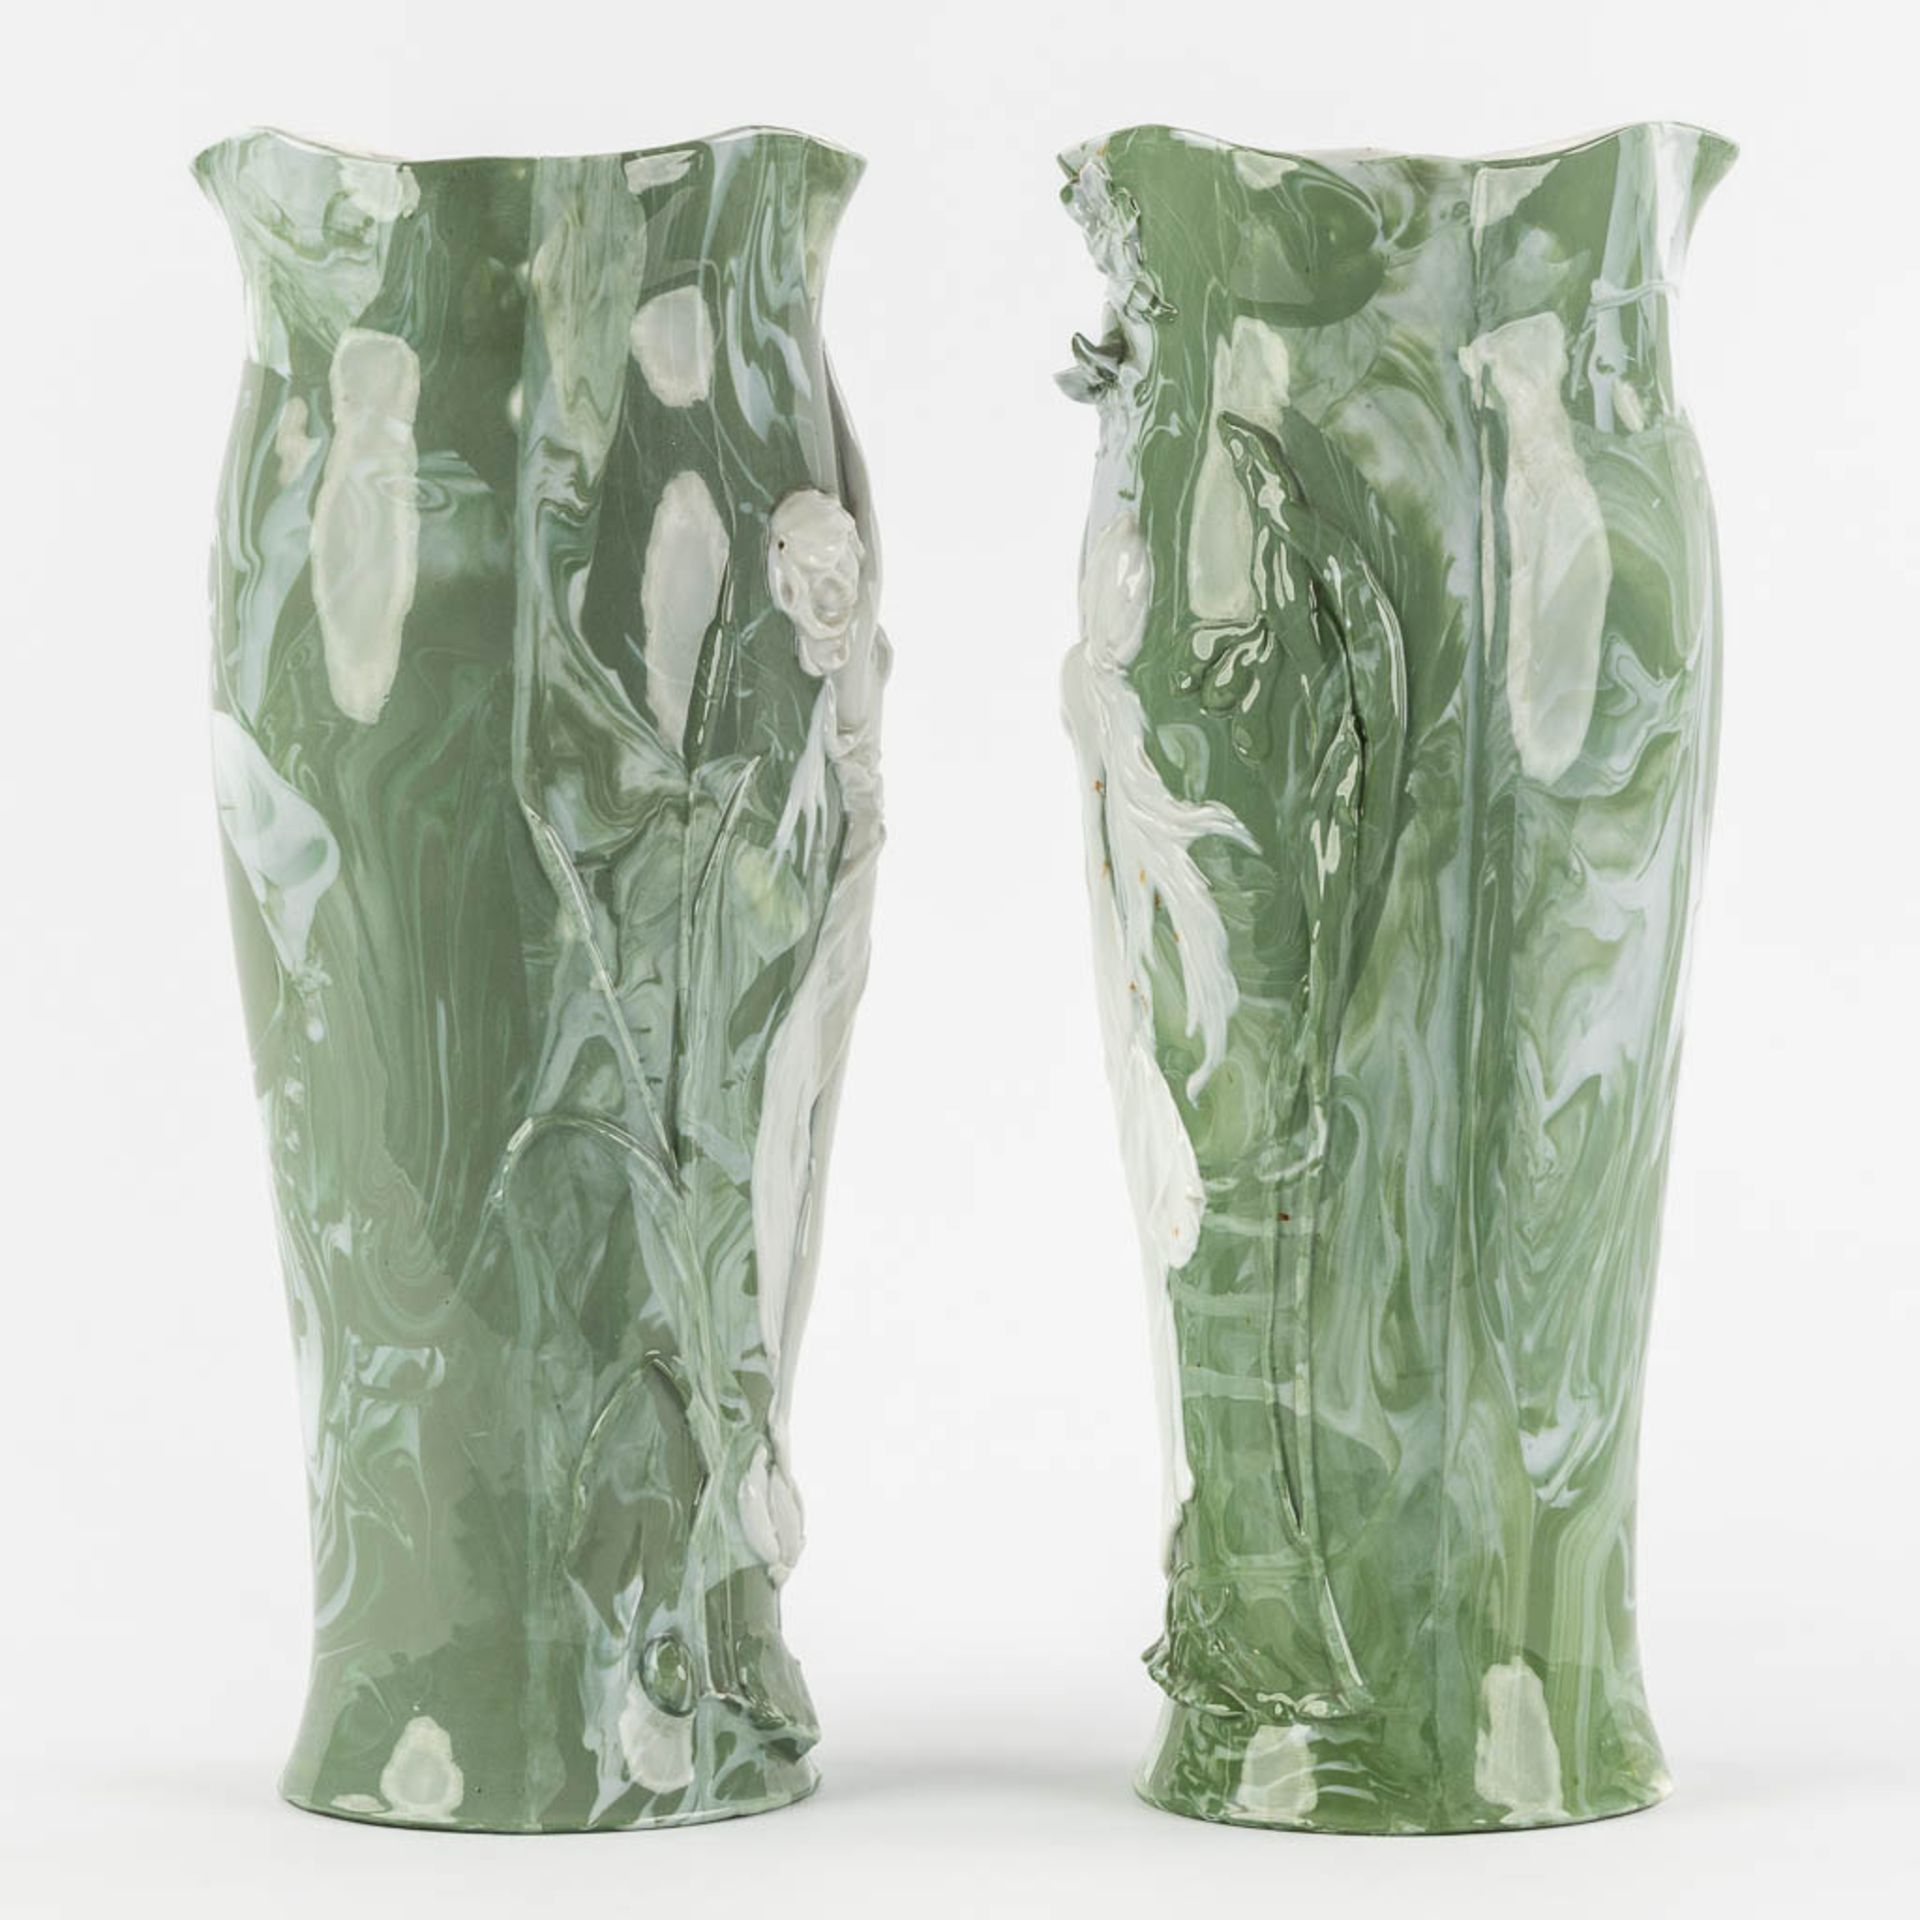 Attributed to Adolf OPPEL (1840-1923) 'Vases with Ladies' Art Nouveau. (L:13 x W:15 x H:36 cm) - Image 4 of 13